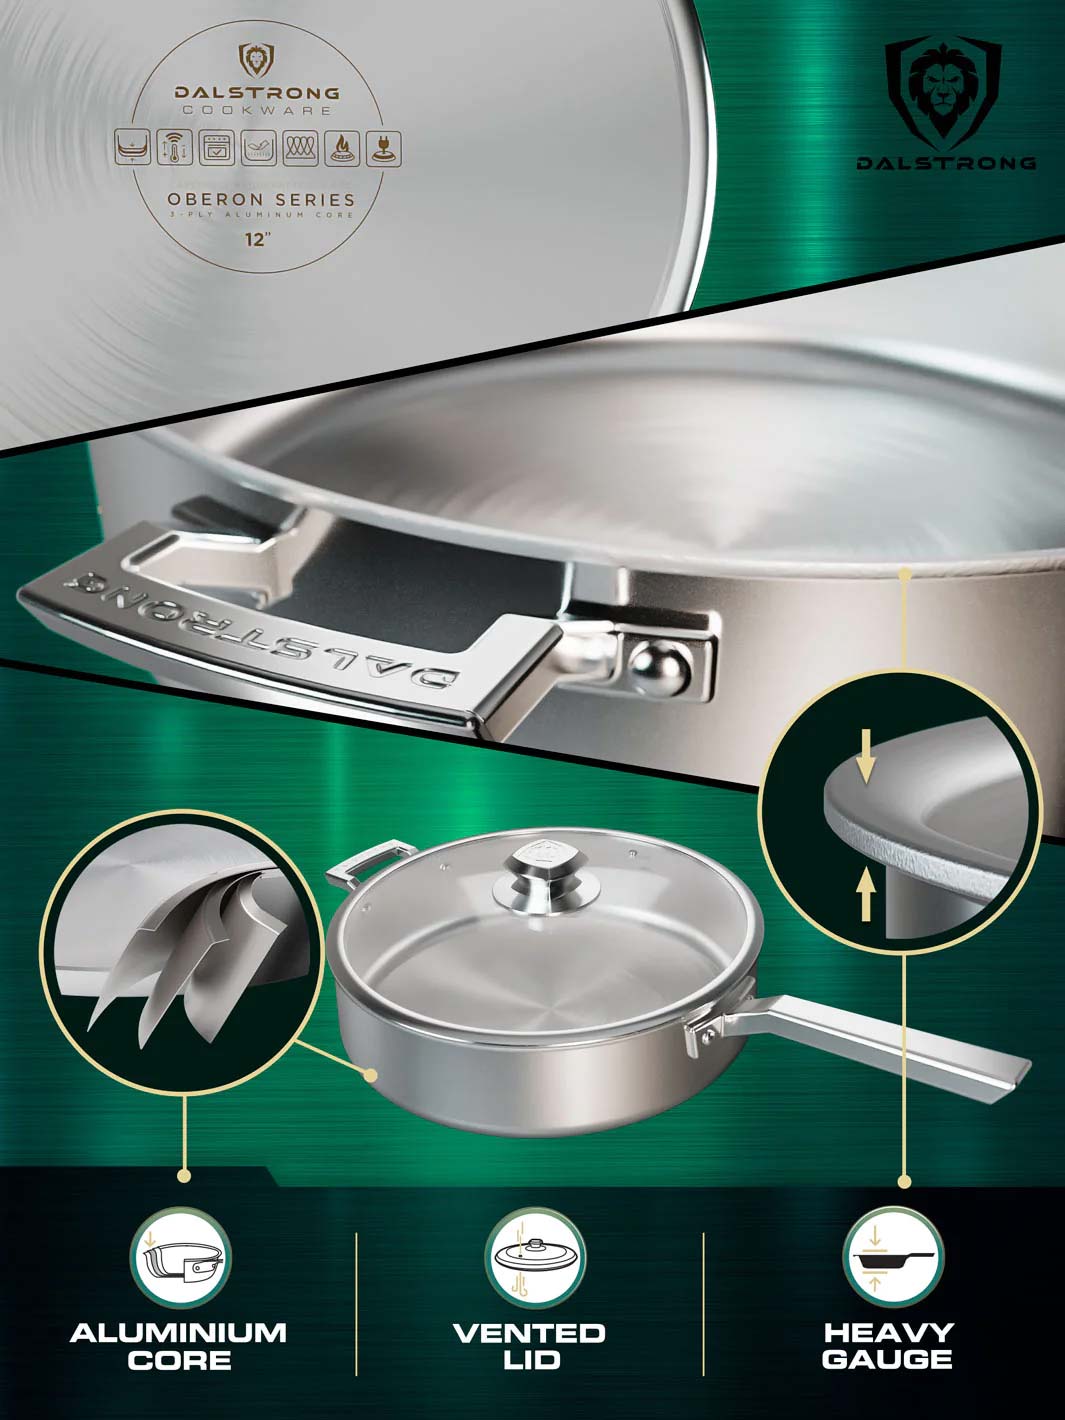 Dalstrong oberon series 12 inch silver saute frying pan featuring it's aluminum core and vented lid.